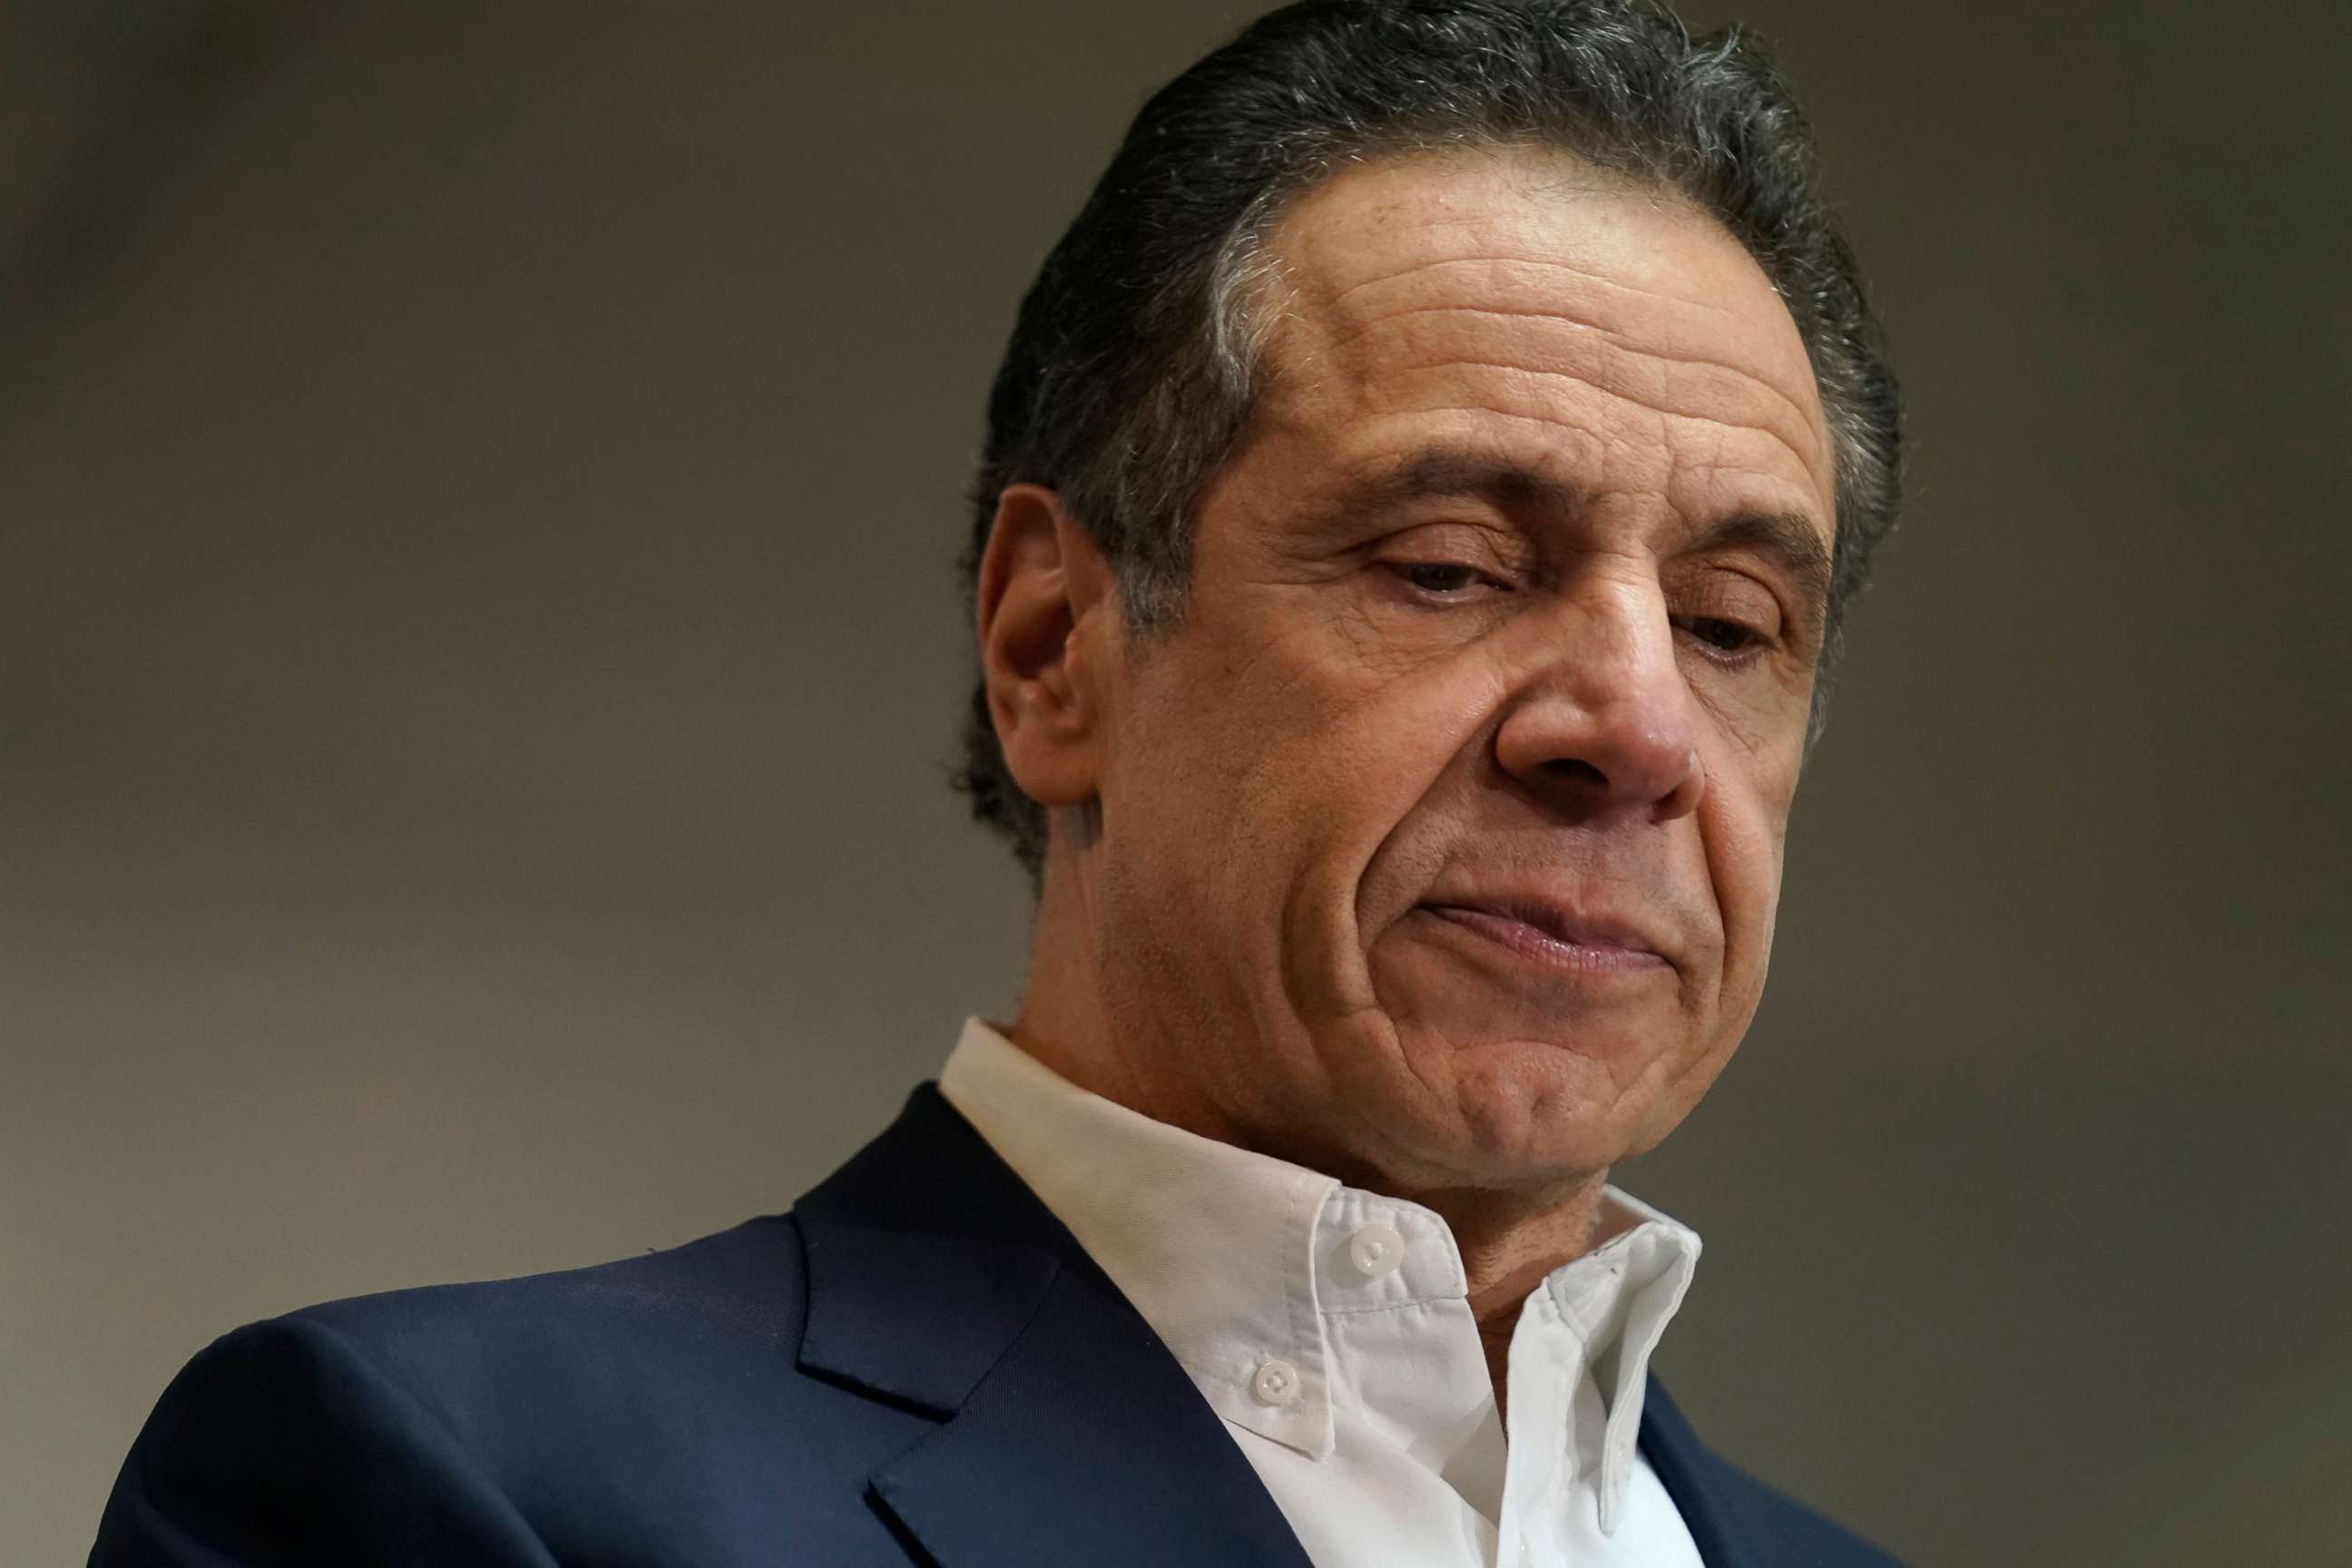 PHOTO: New York Governor Andrew Cuomo speaks before getting vaccinated at the mass vaccination site at Mount Neboh Baptist Church in Harlem on March 17, 2021 in New York City.